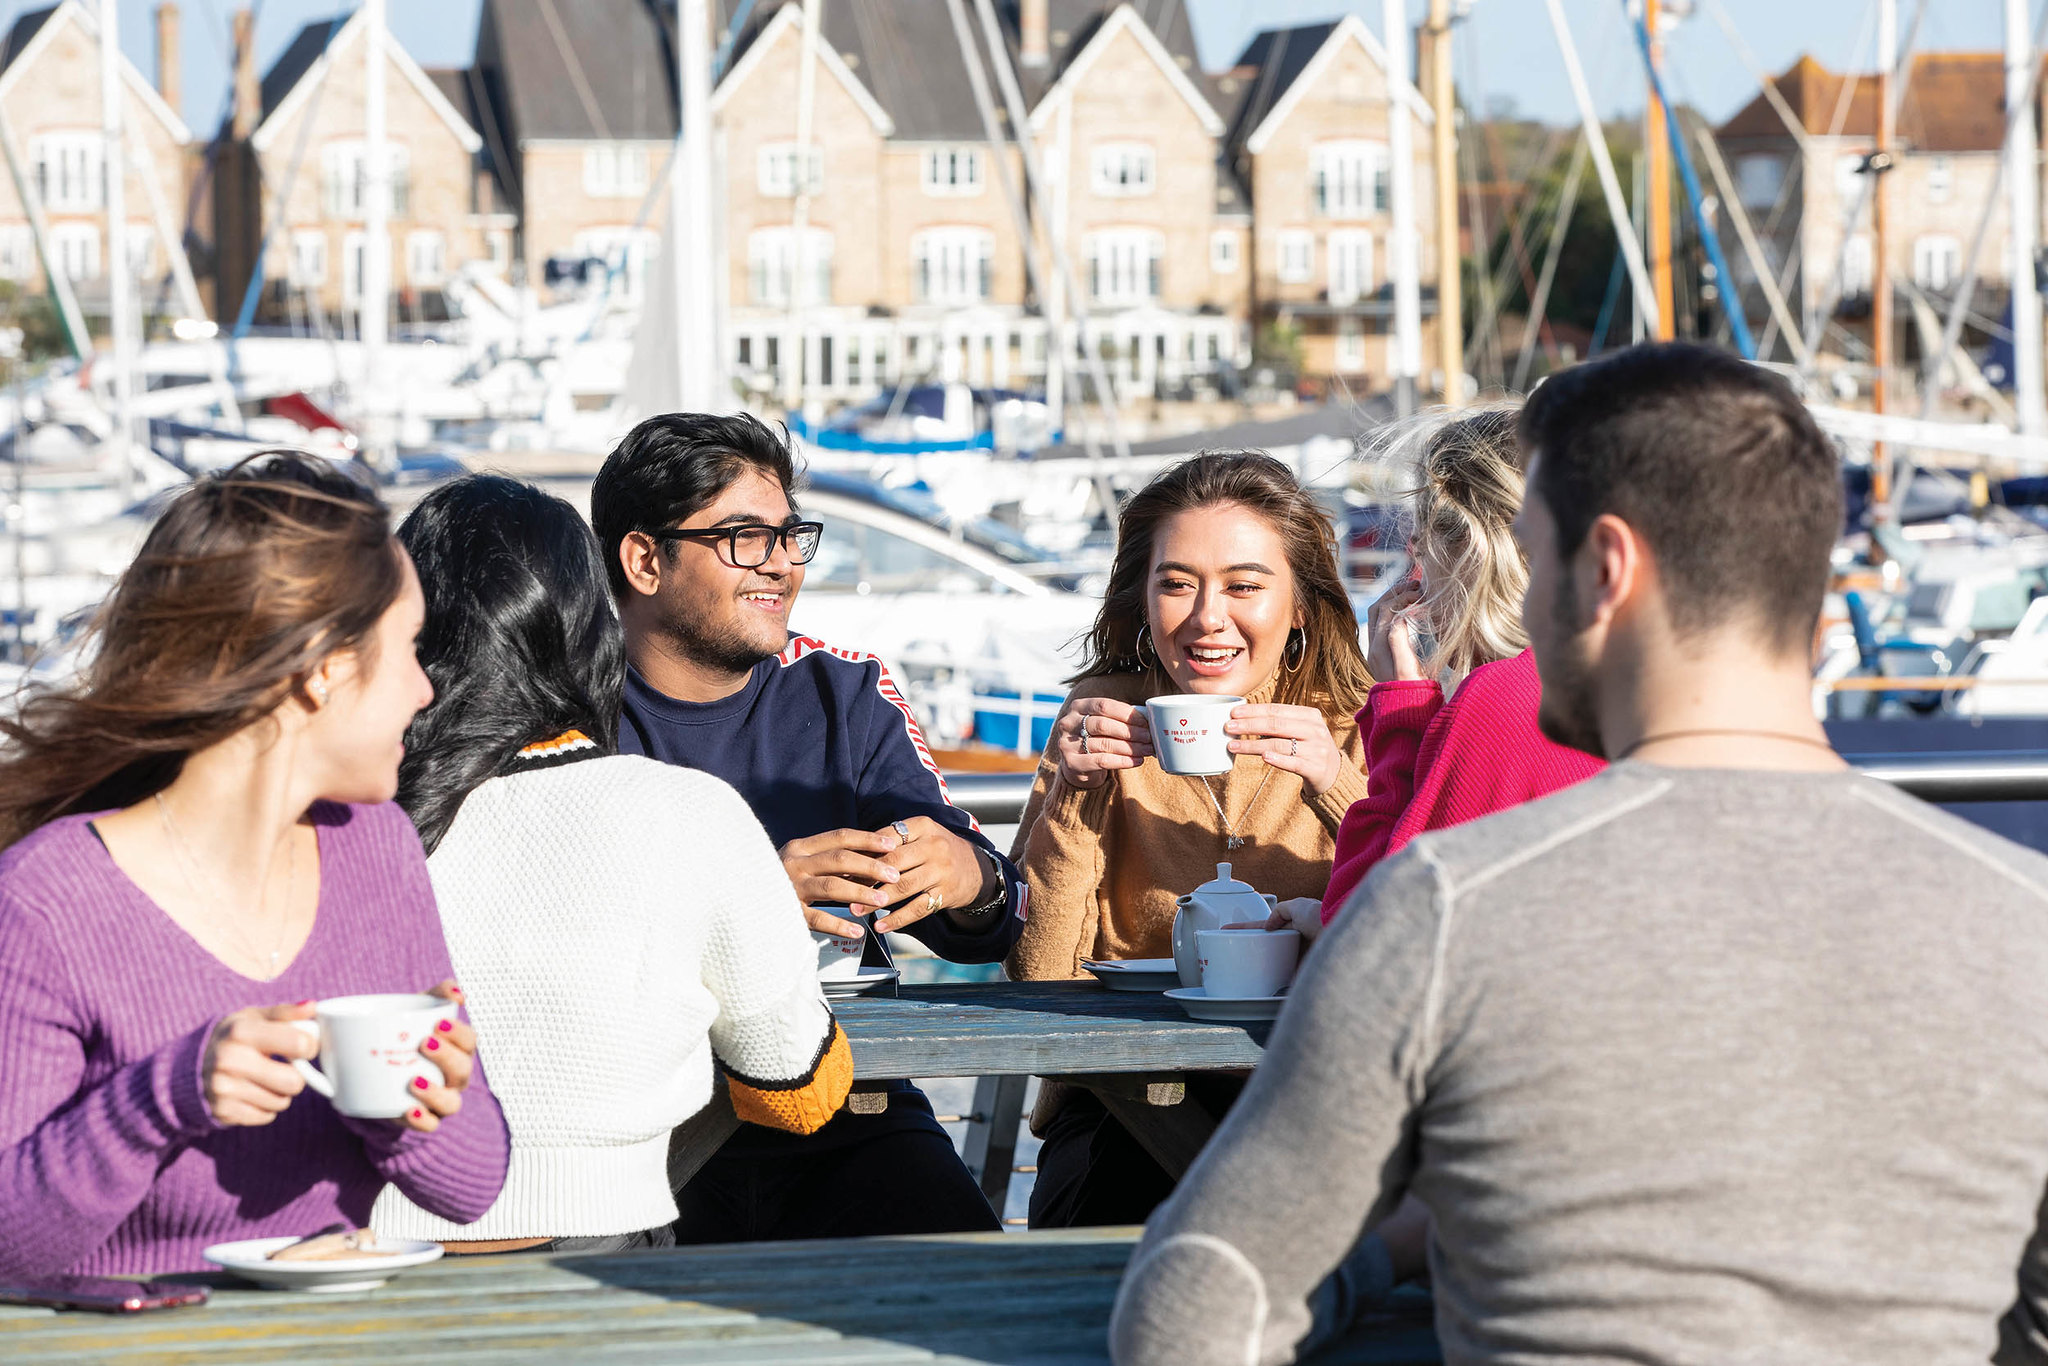 Students sat together drinking tea at the Dockyard